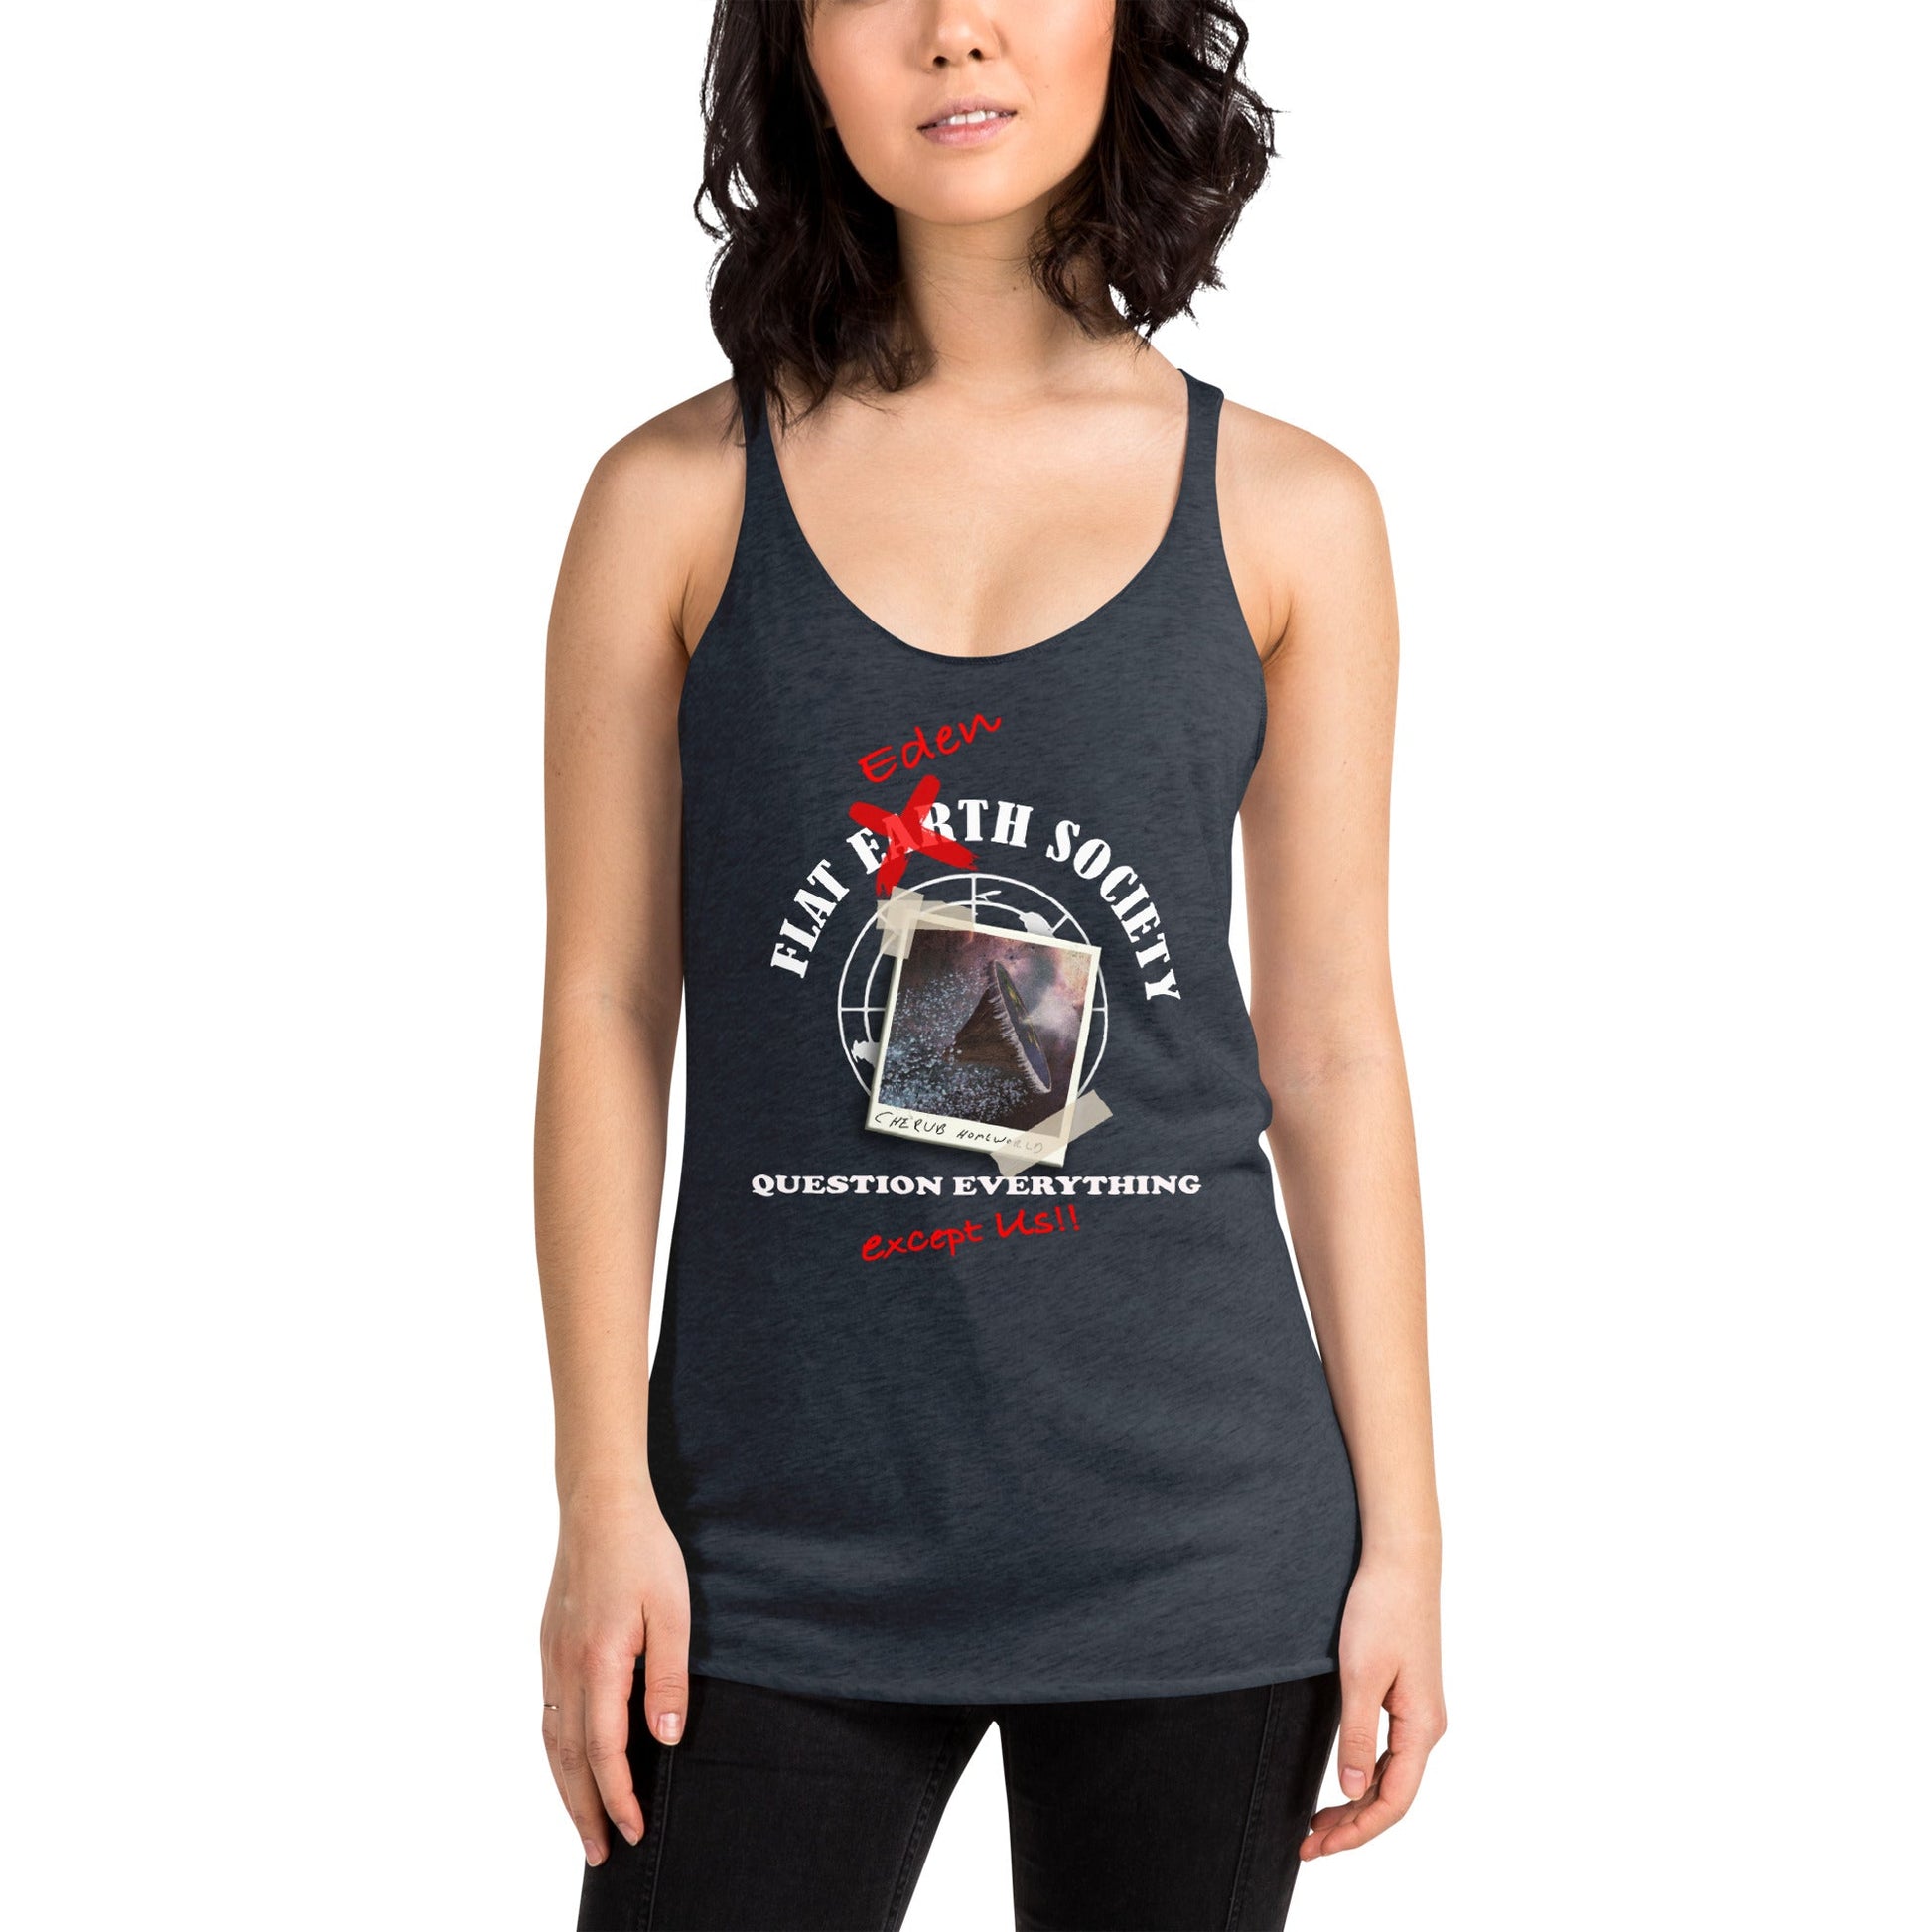 Women's Racerback Tank | Intergalactic Space Force 2 | Flat Eden Society - Spectral Ink Shop - Shirts & Tops -2753985_6656